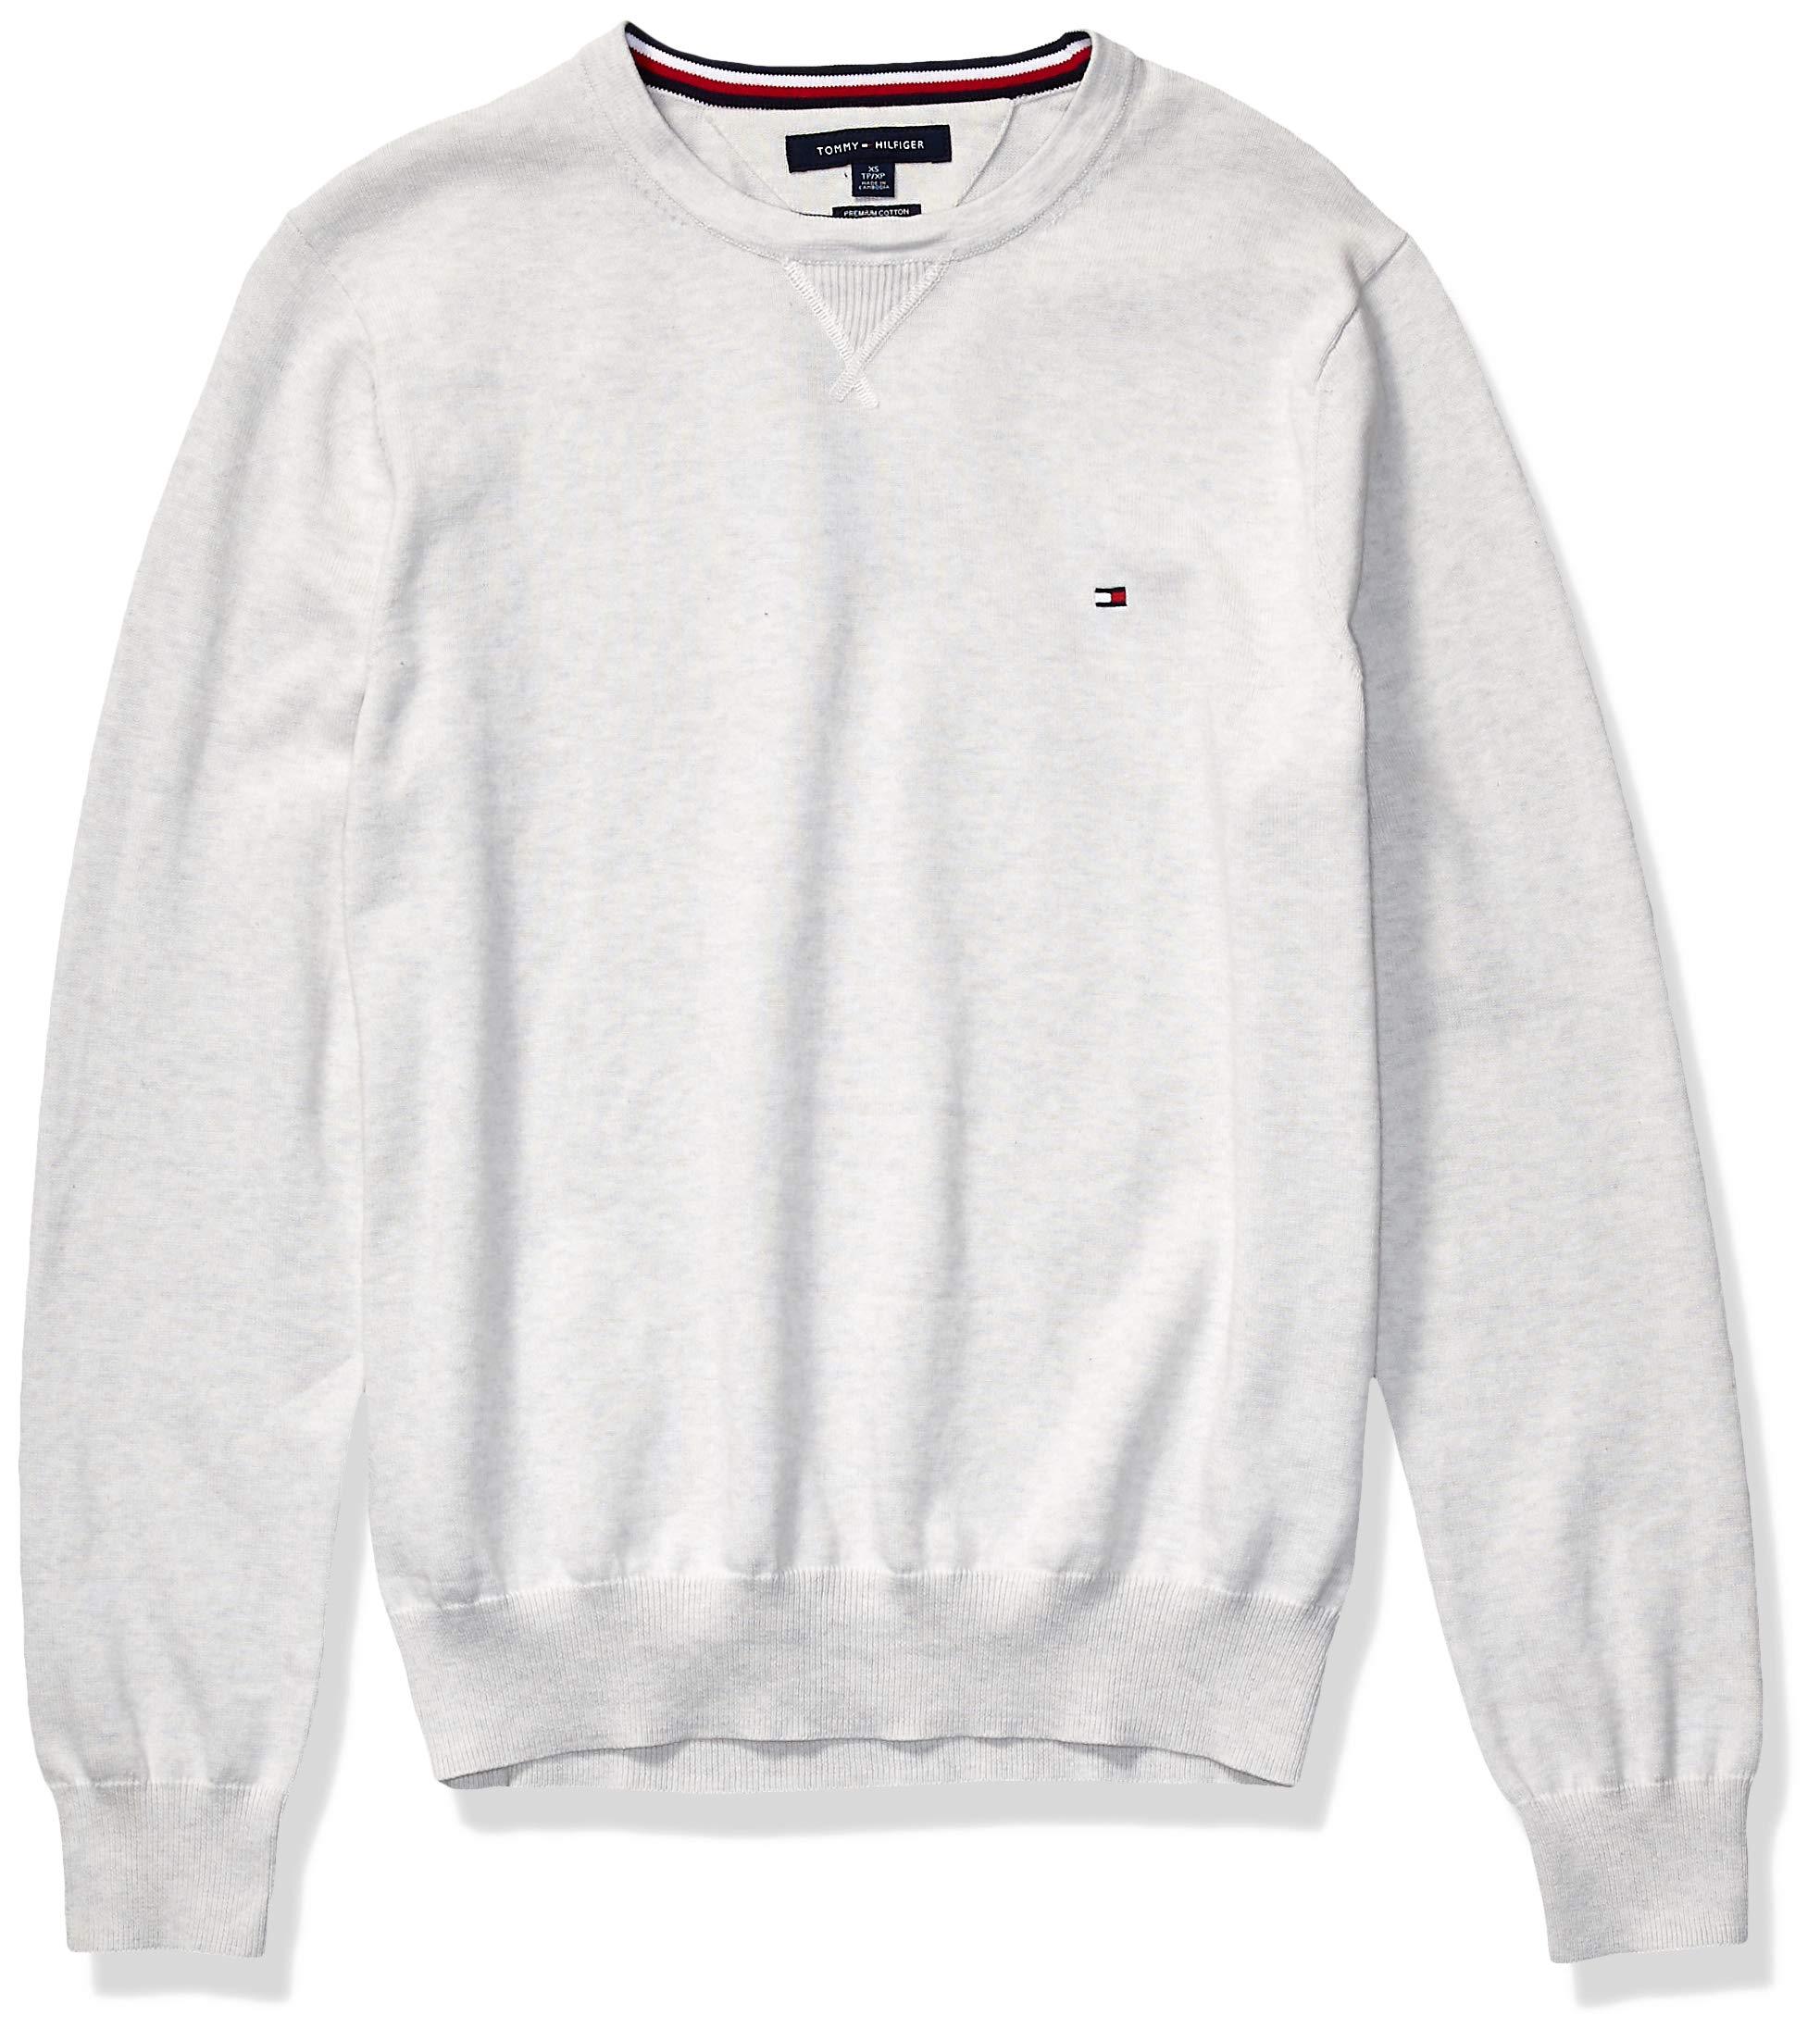 Tommy Hilfiger Solid Crewneck Sweater in Bright White Heather (White ...